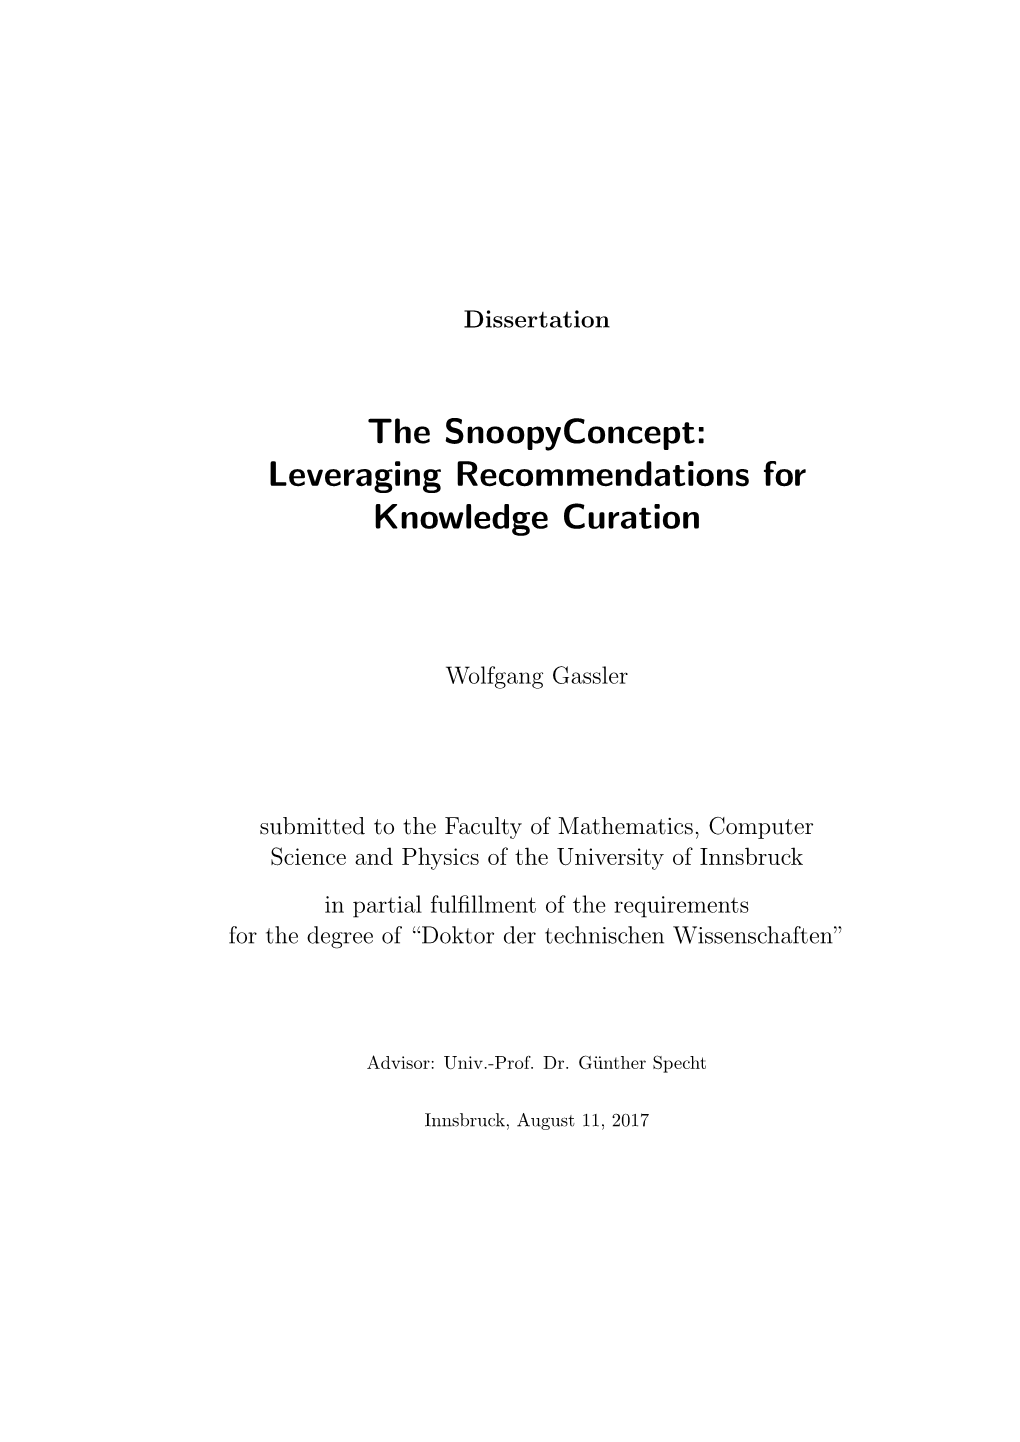 Leveraging Recommendations for Knowledge Curation